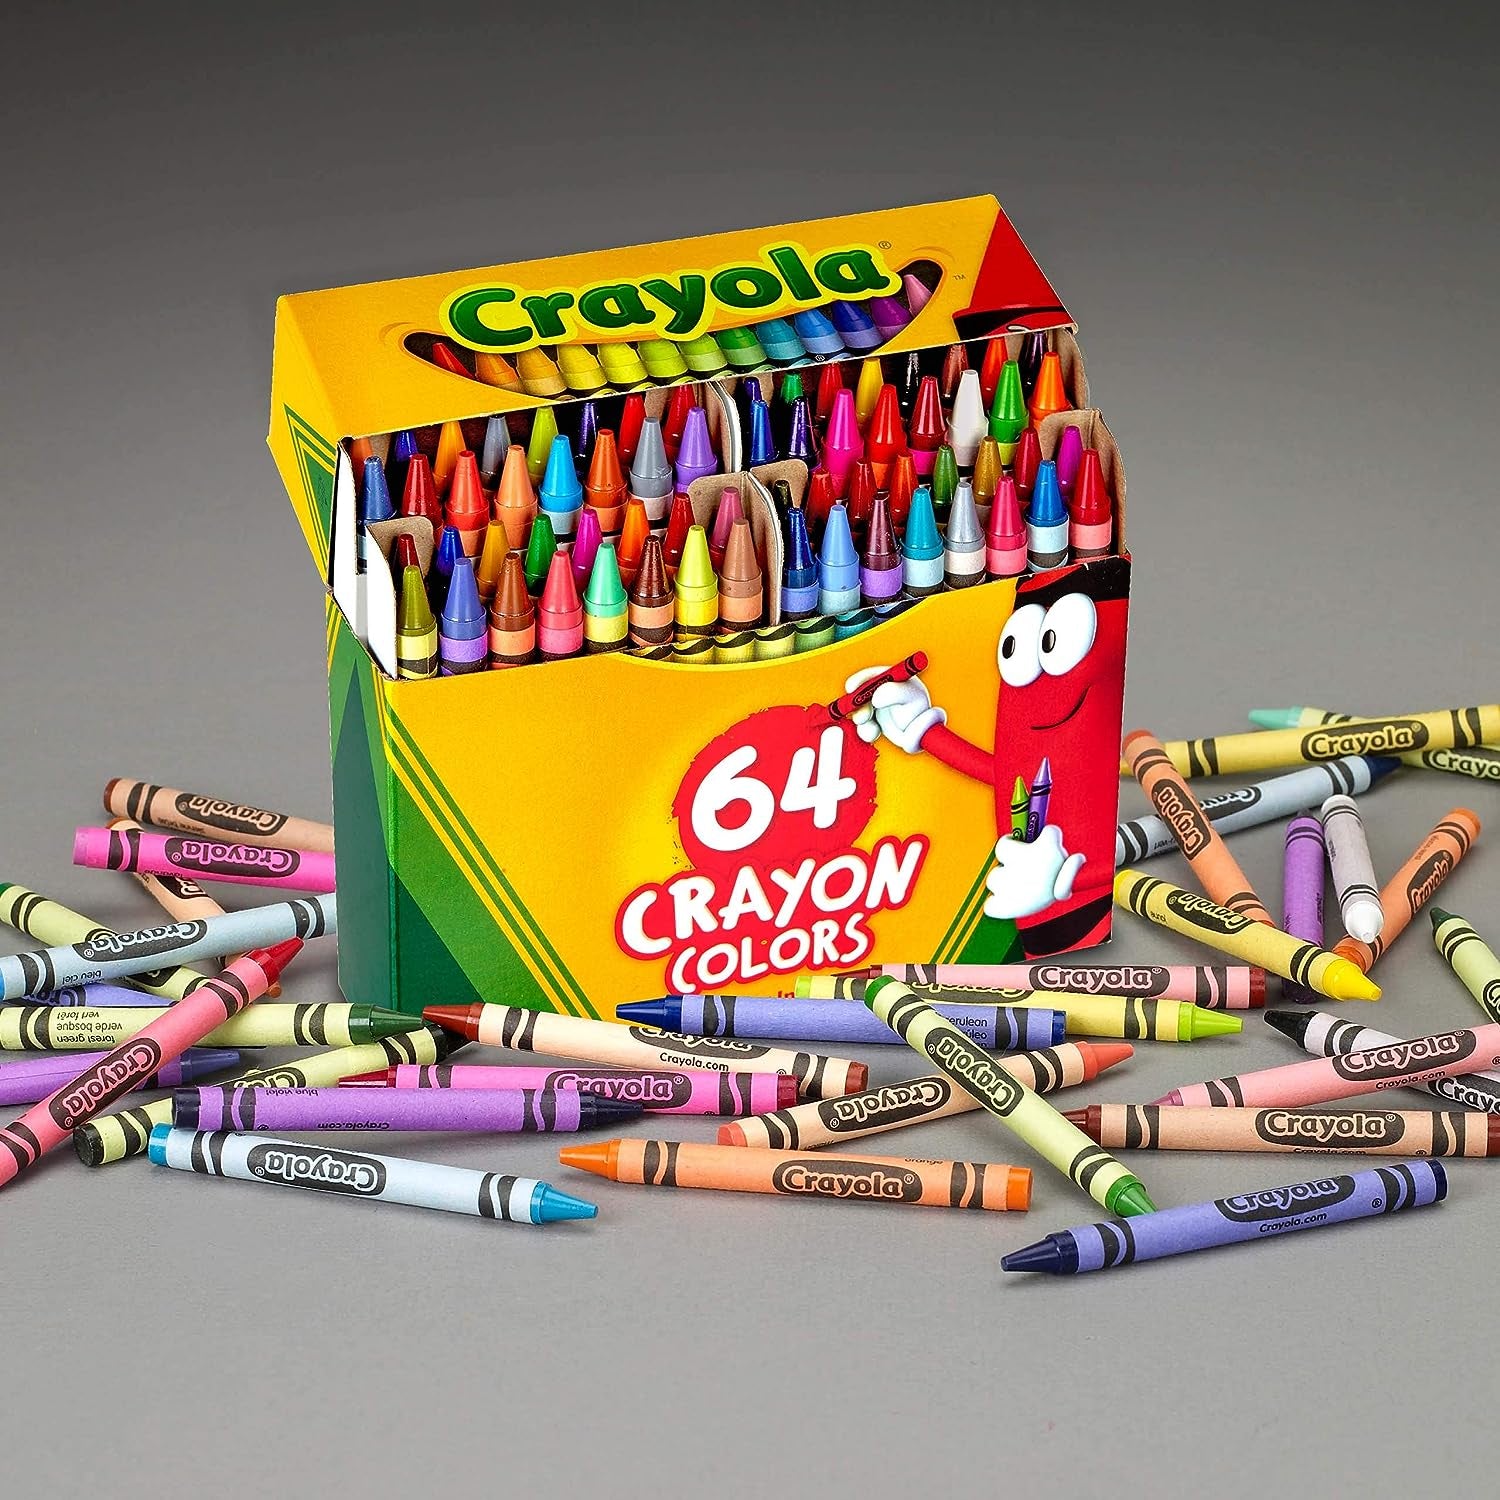 Crayon Box Gingerbread – Woodfire Candle Co